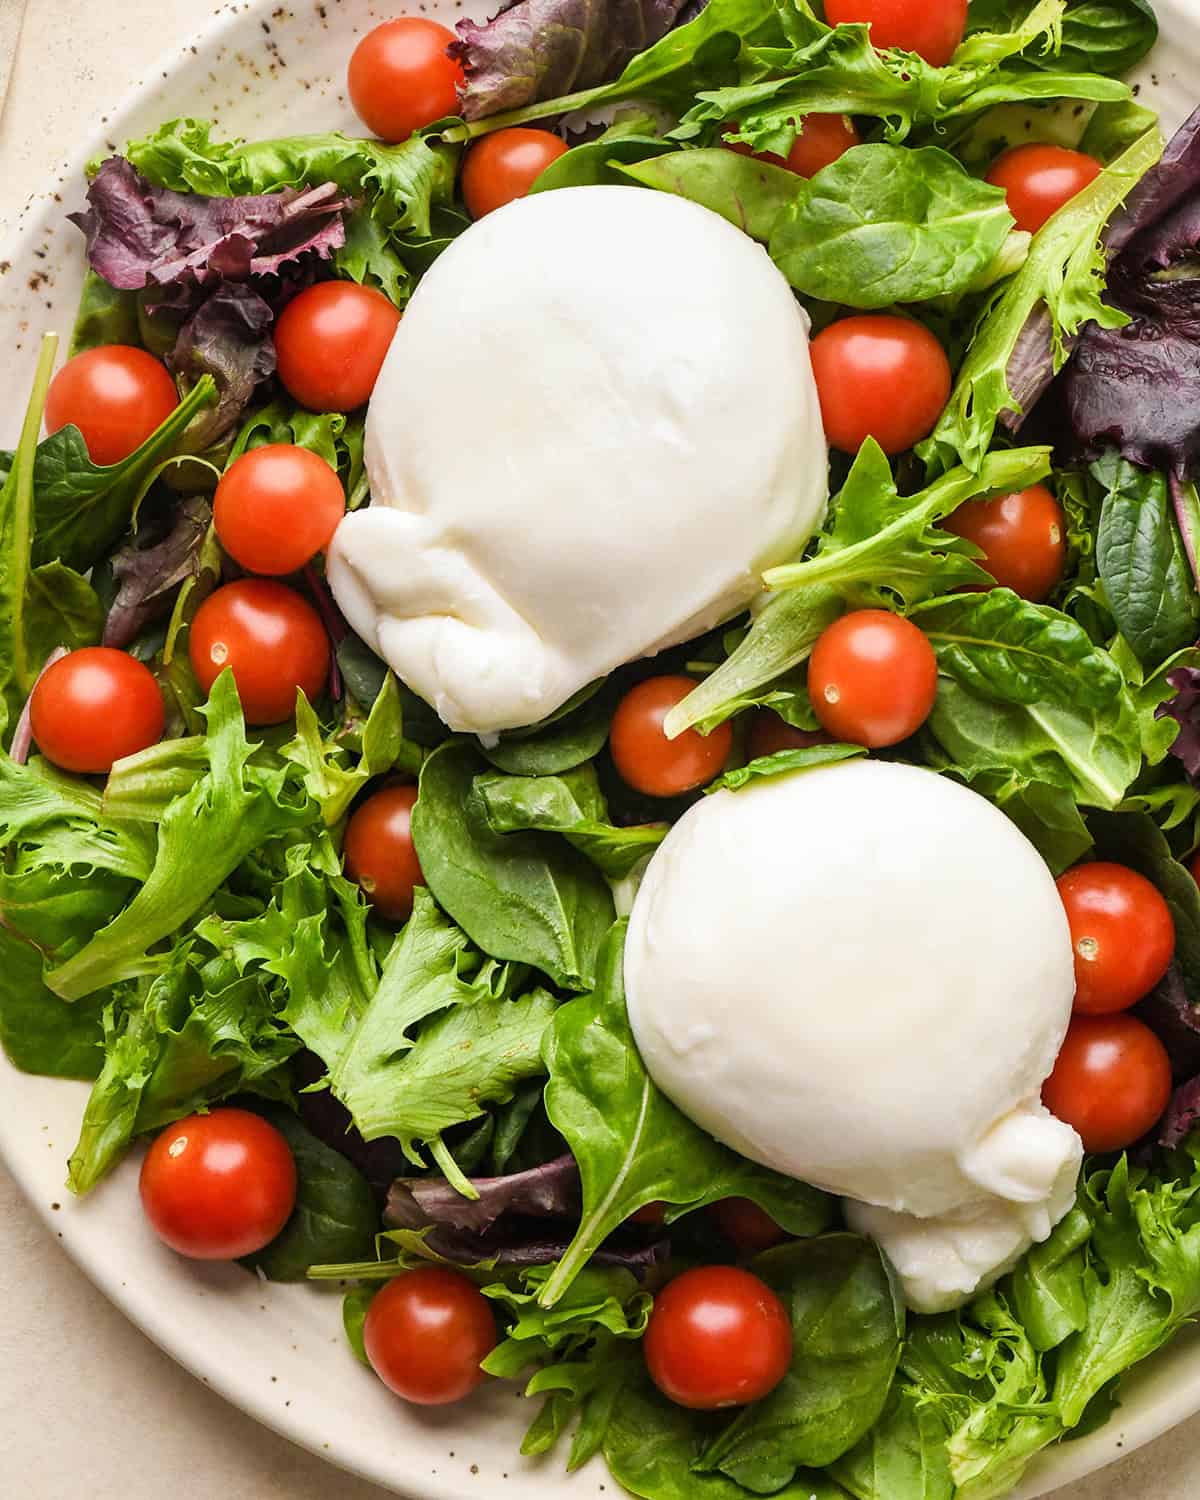 how to assemble burrata salad - tomatoes, spring mix and burrata cheese on a plate